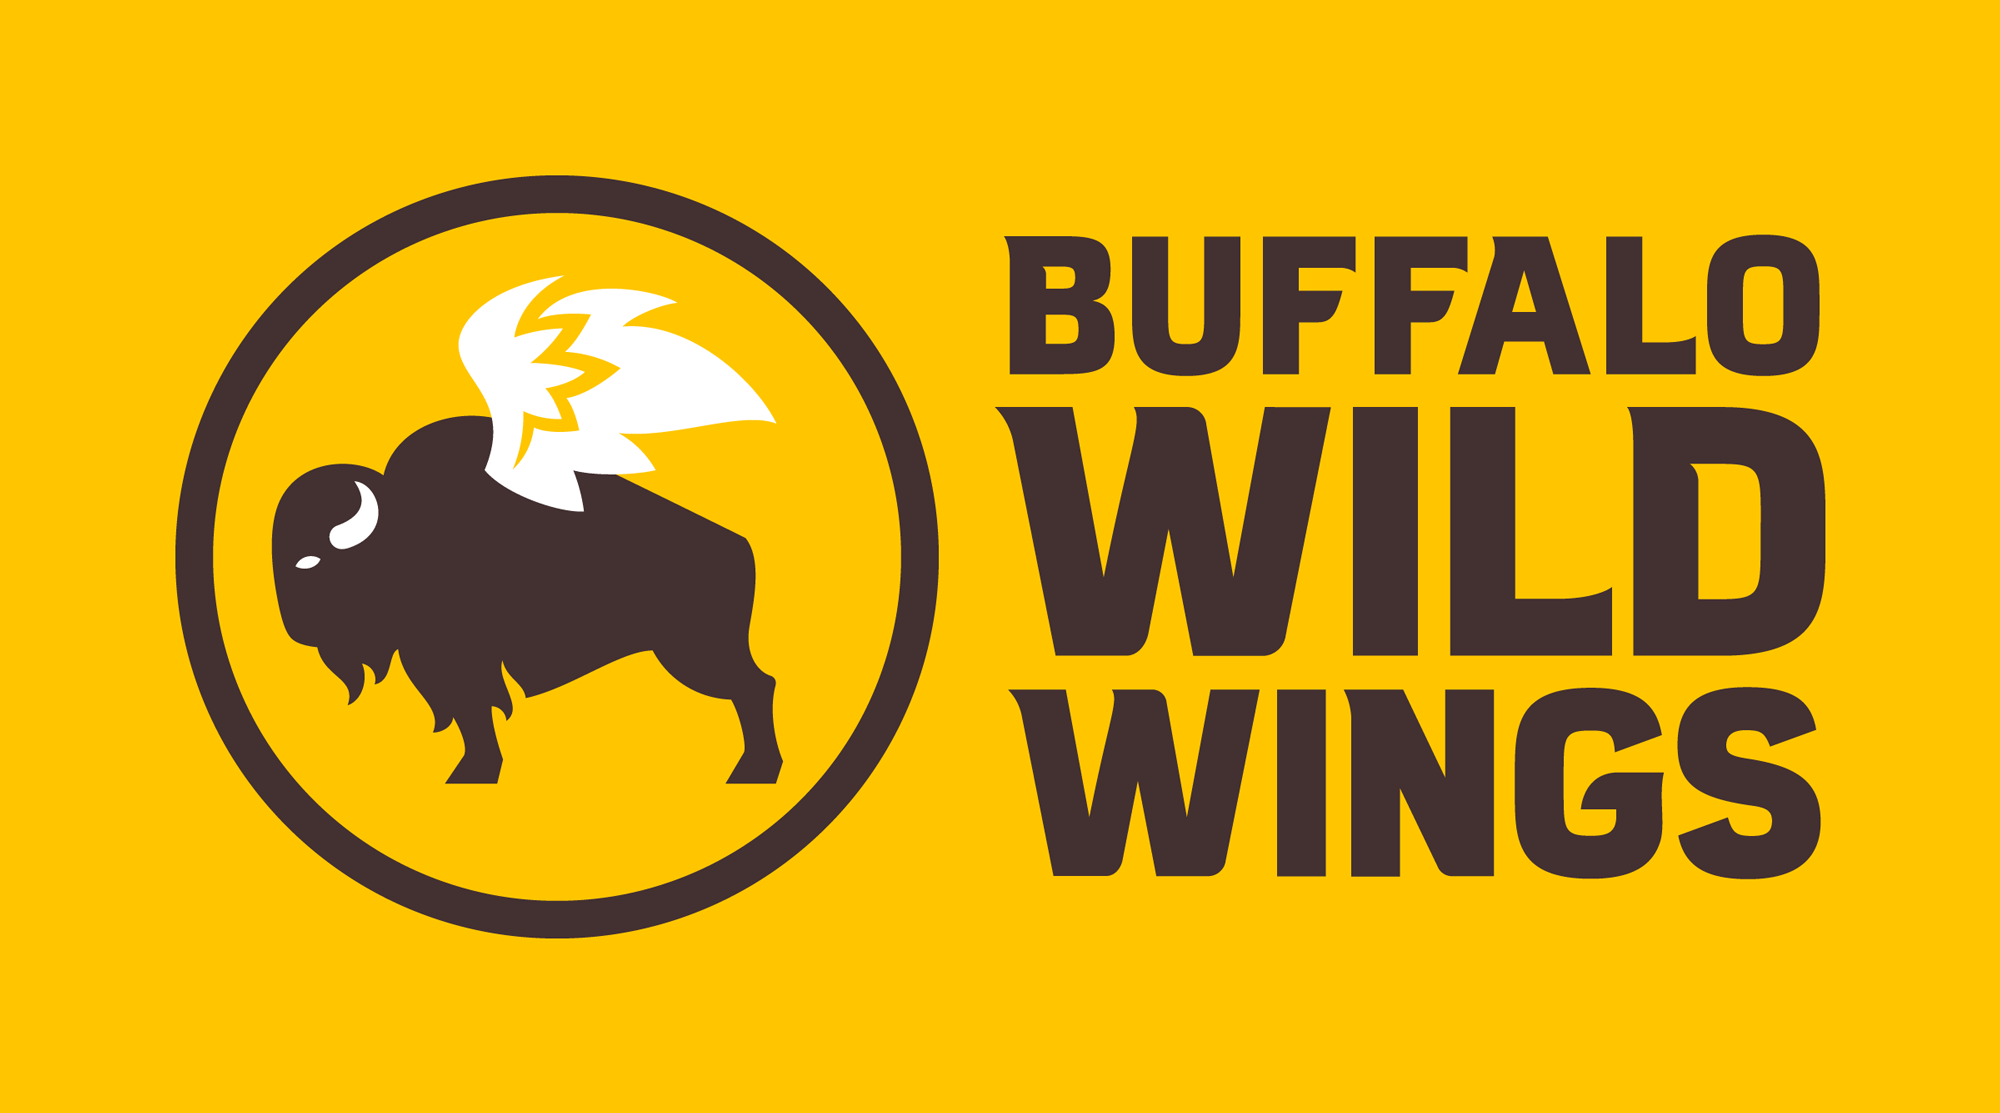 Brand New: New Logo and Identity for Buffalo Wild Wings by Interbrand